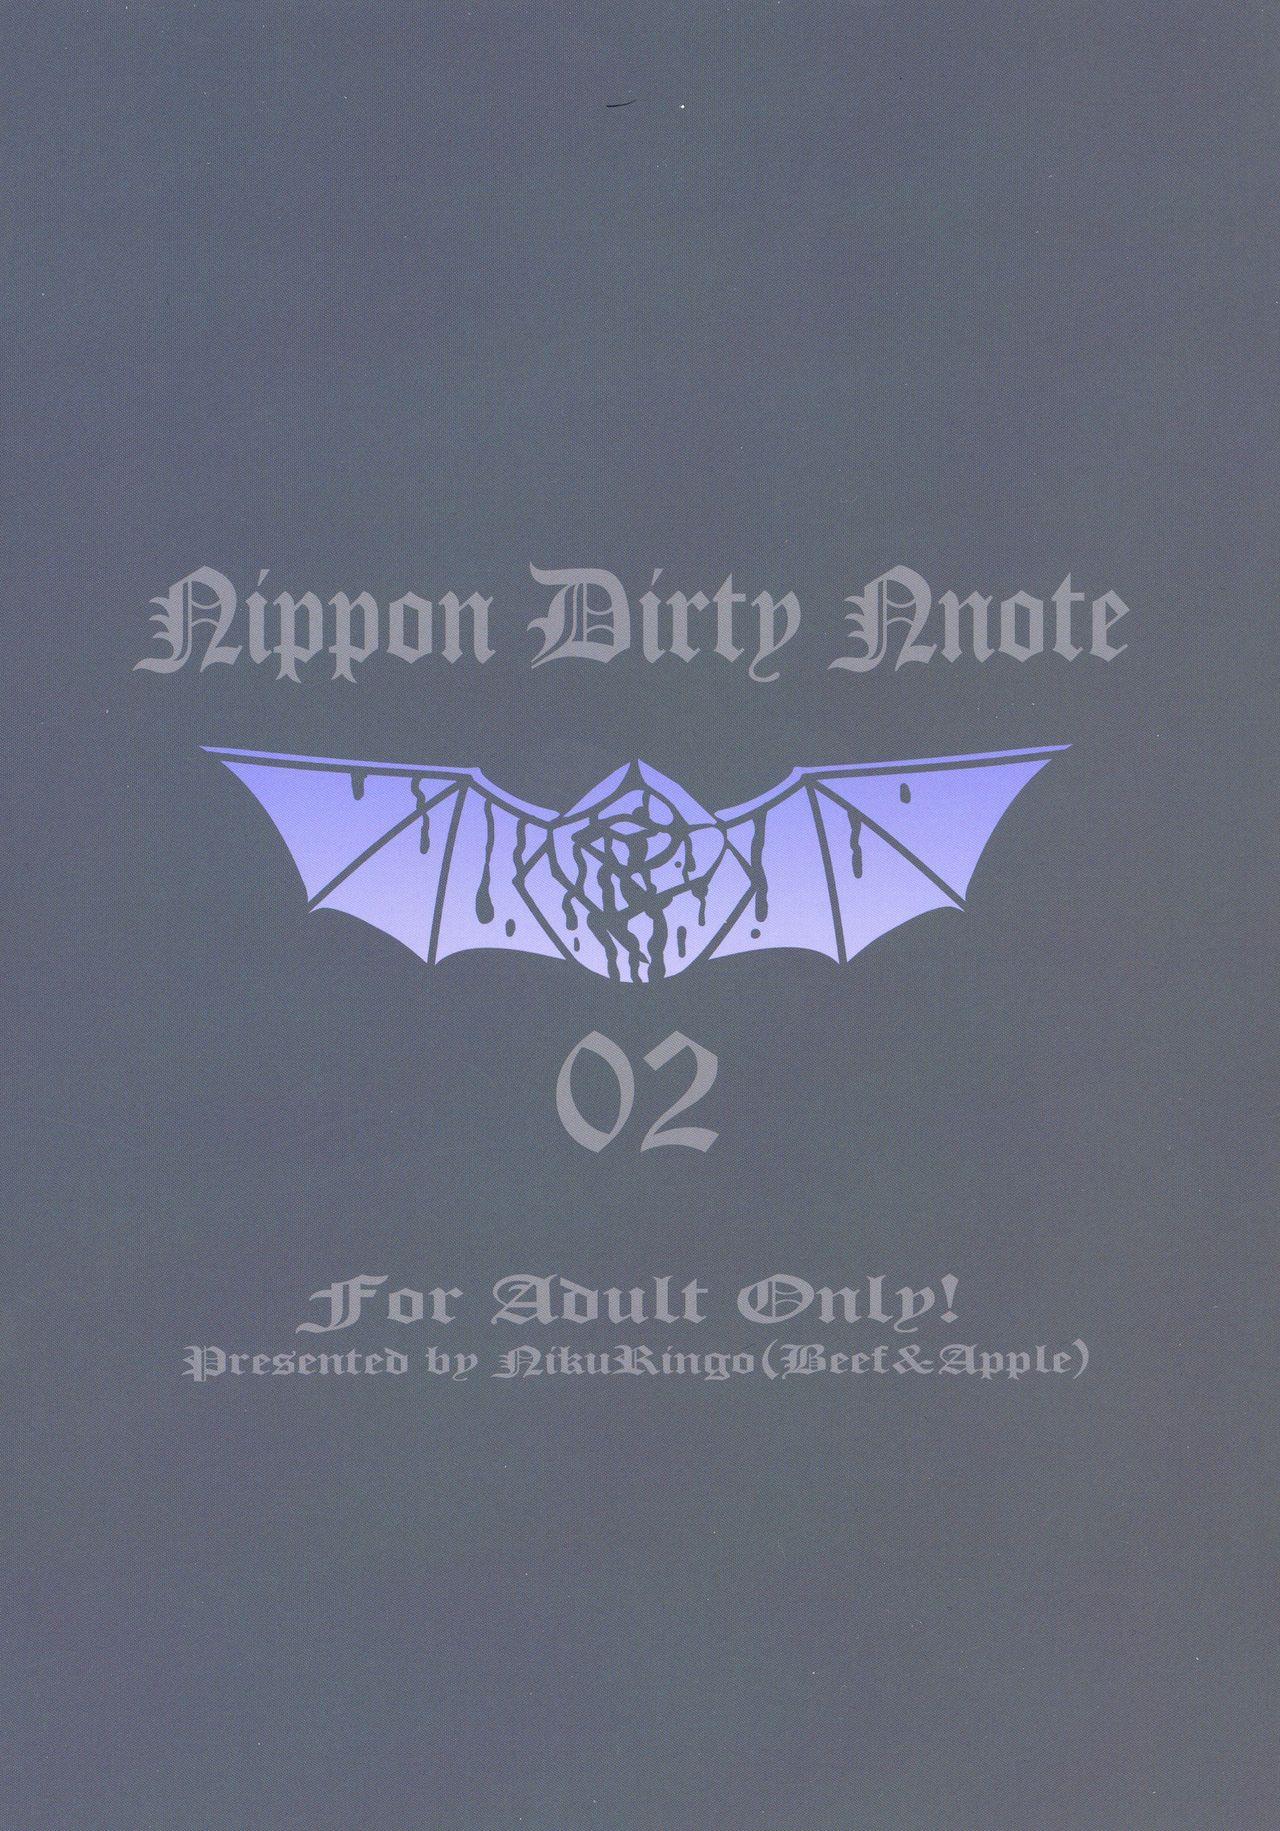 NIPPON DIRTY NOTE 02 1